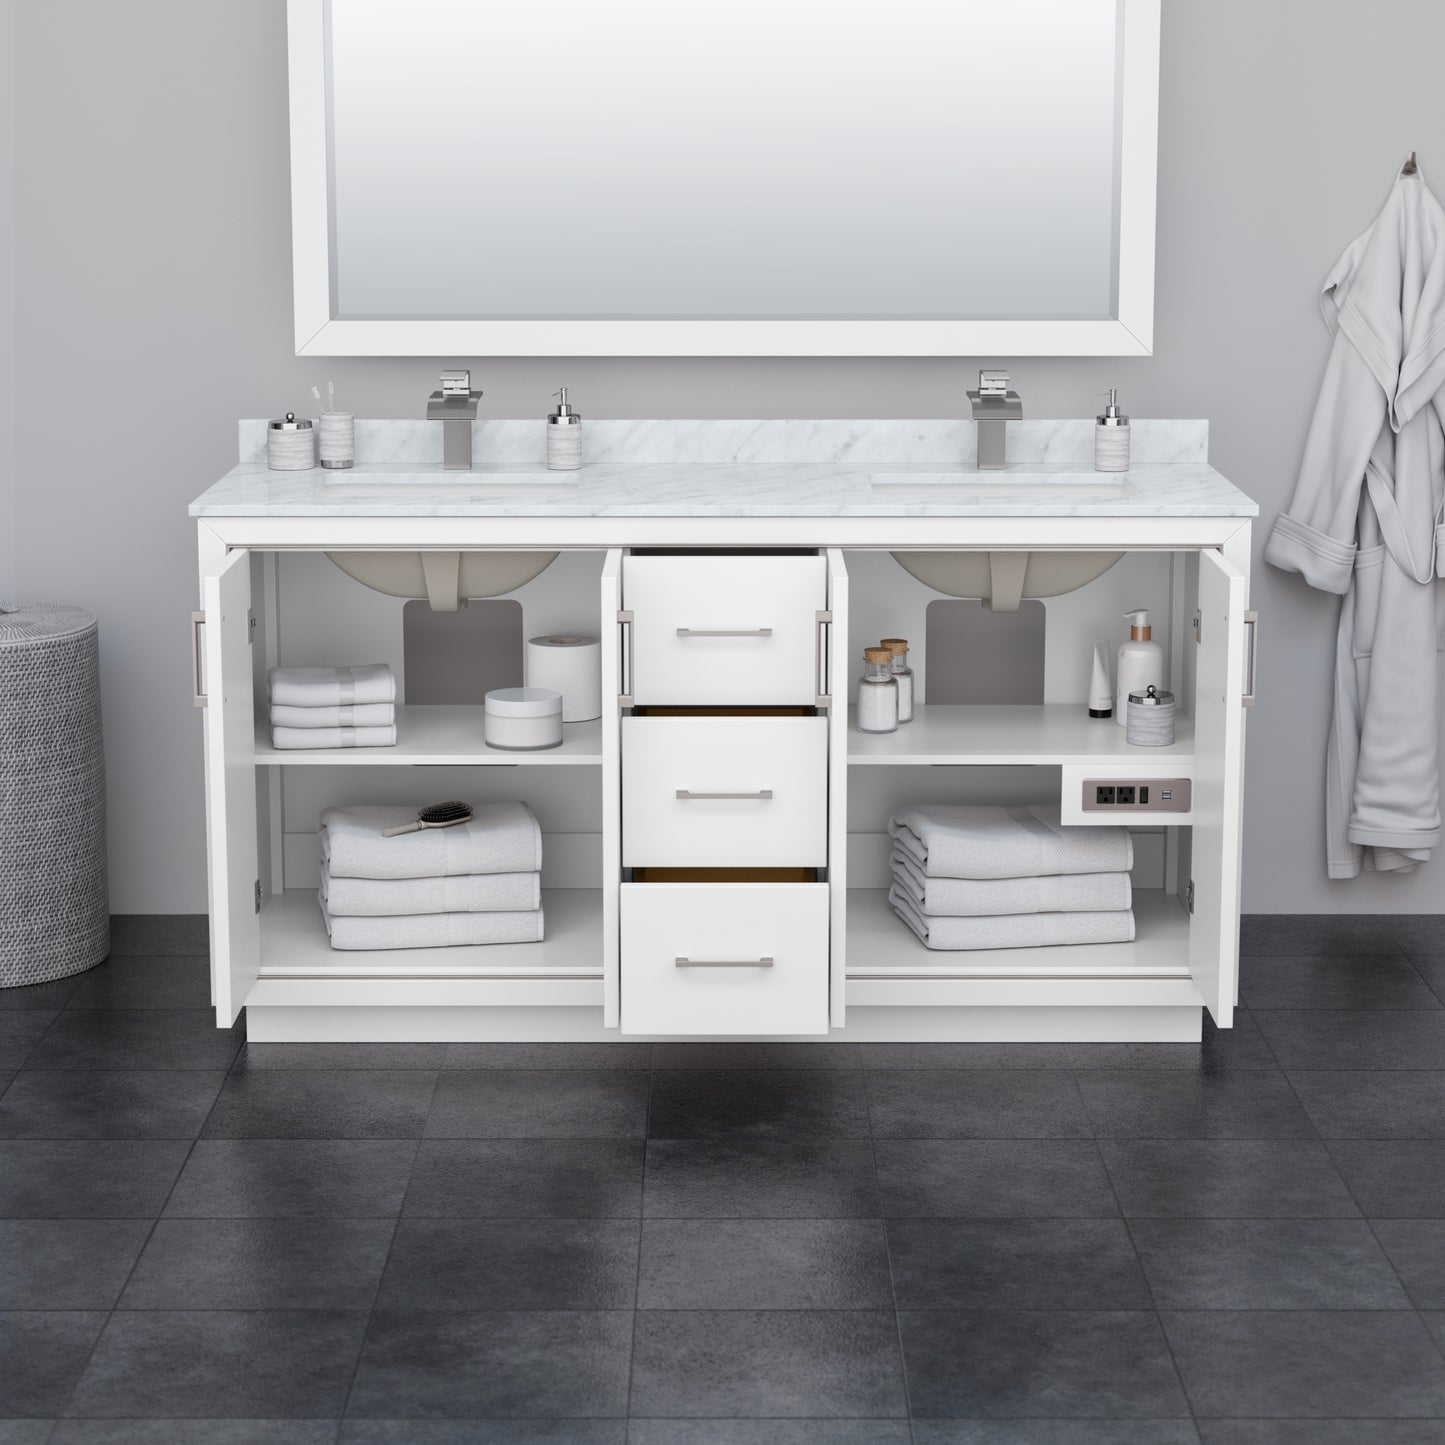 Wyndham Icon 66 Inch Double Bathroom Vanity in White with White Carrara Marble Countertop and Undermount Square Sinks in Satin Bronze Trim - Luxe Bathroom Vanities